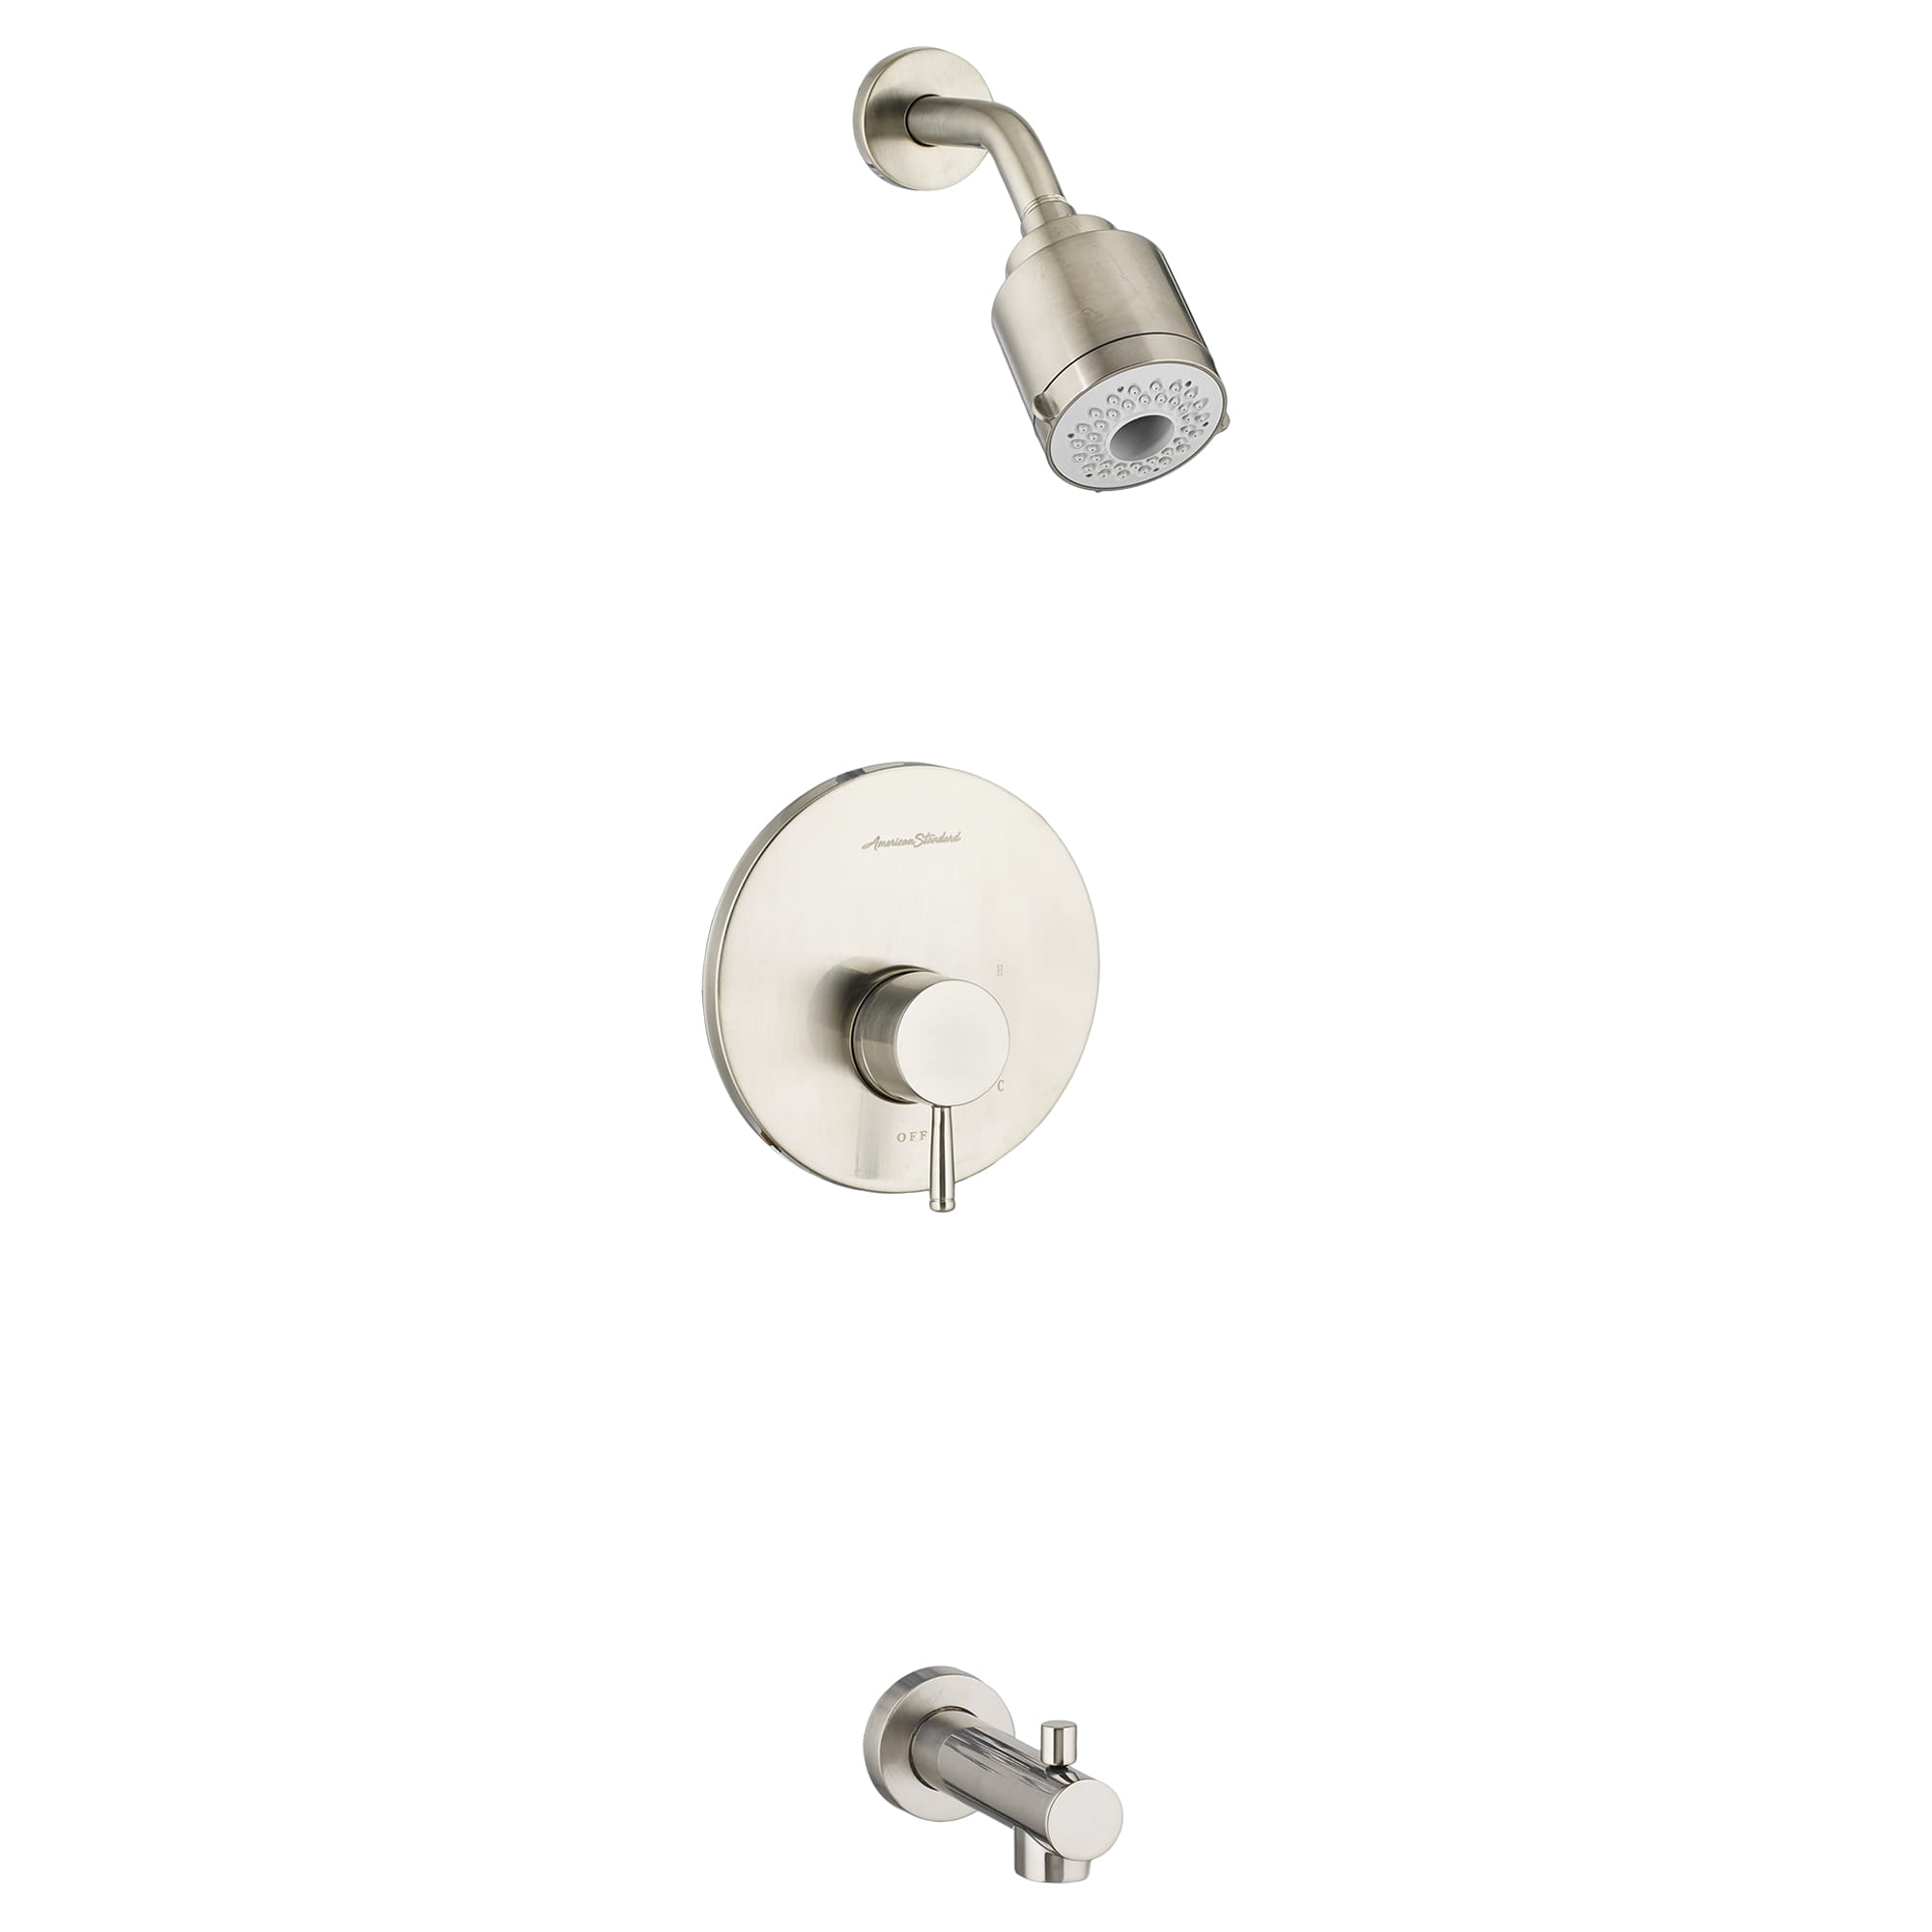 Serin 2.0 GPM Tub and Shower Trim Kit with FloWise Showerhead and Lever Handle